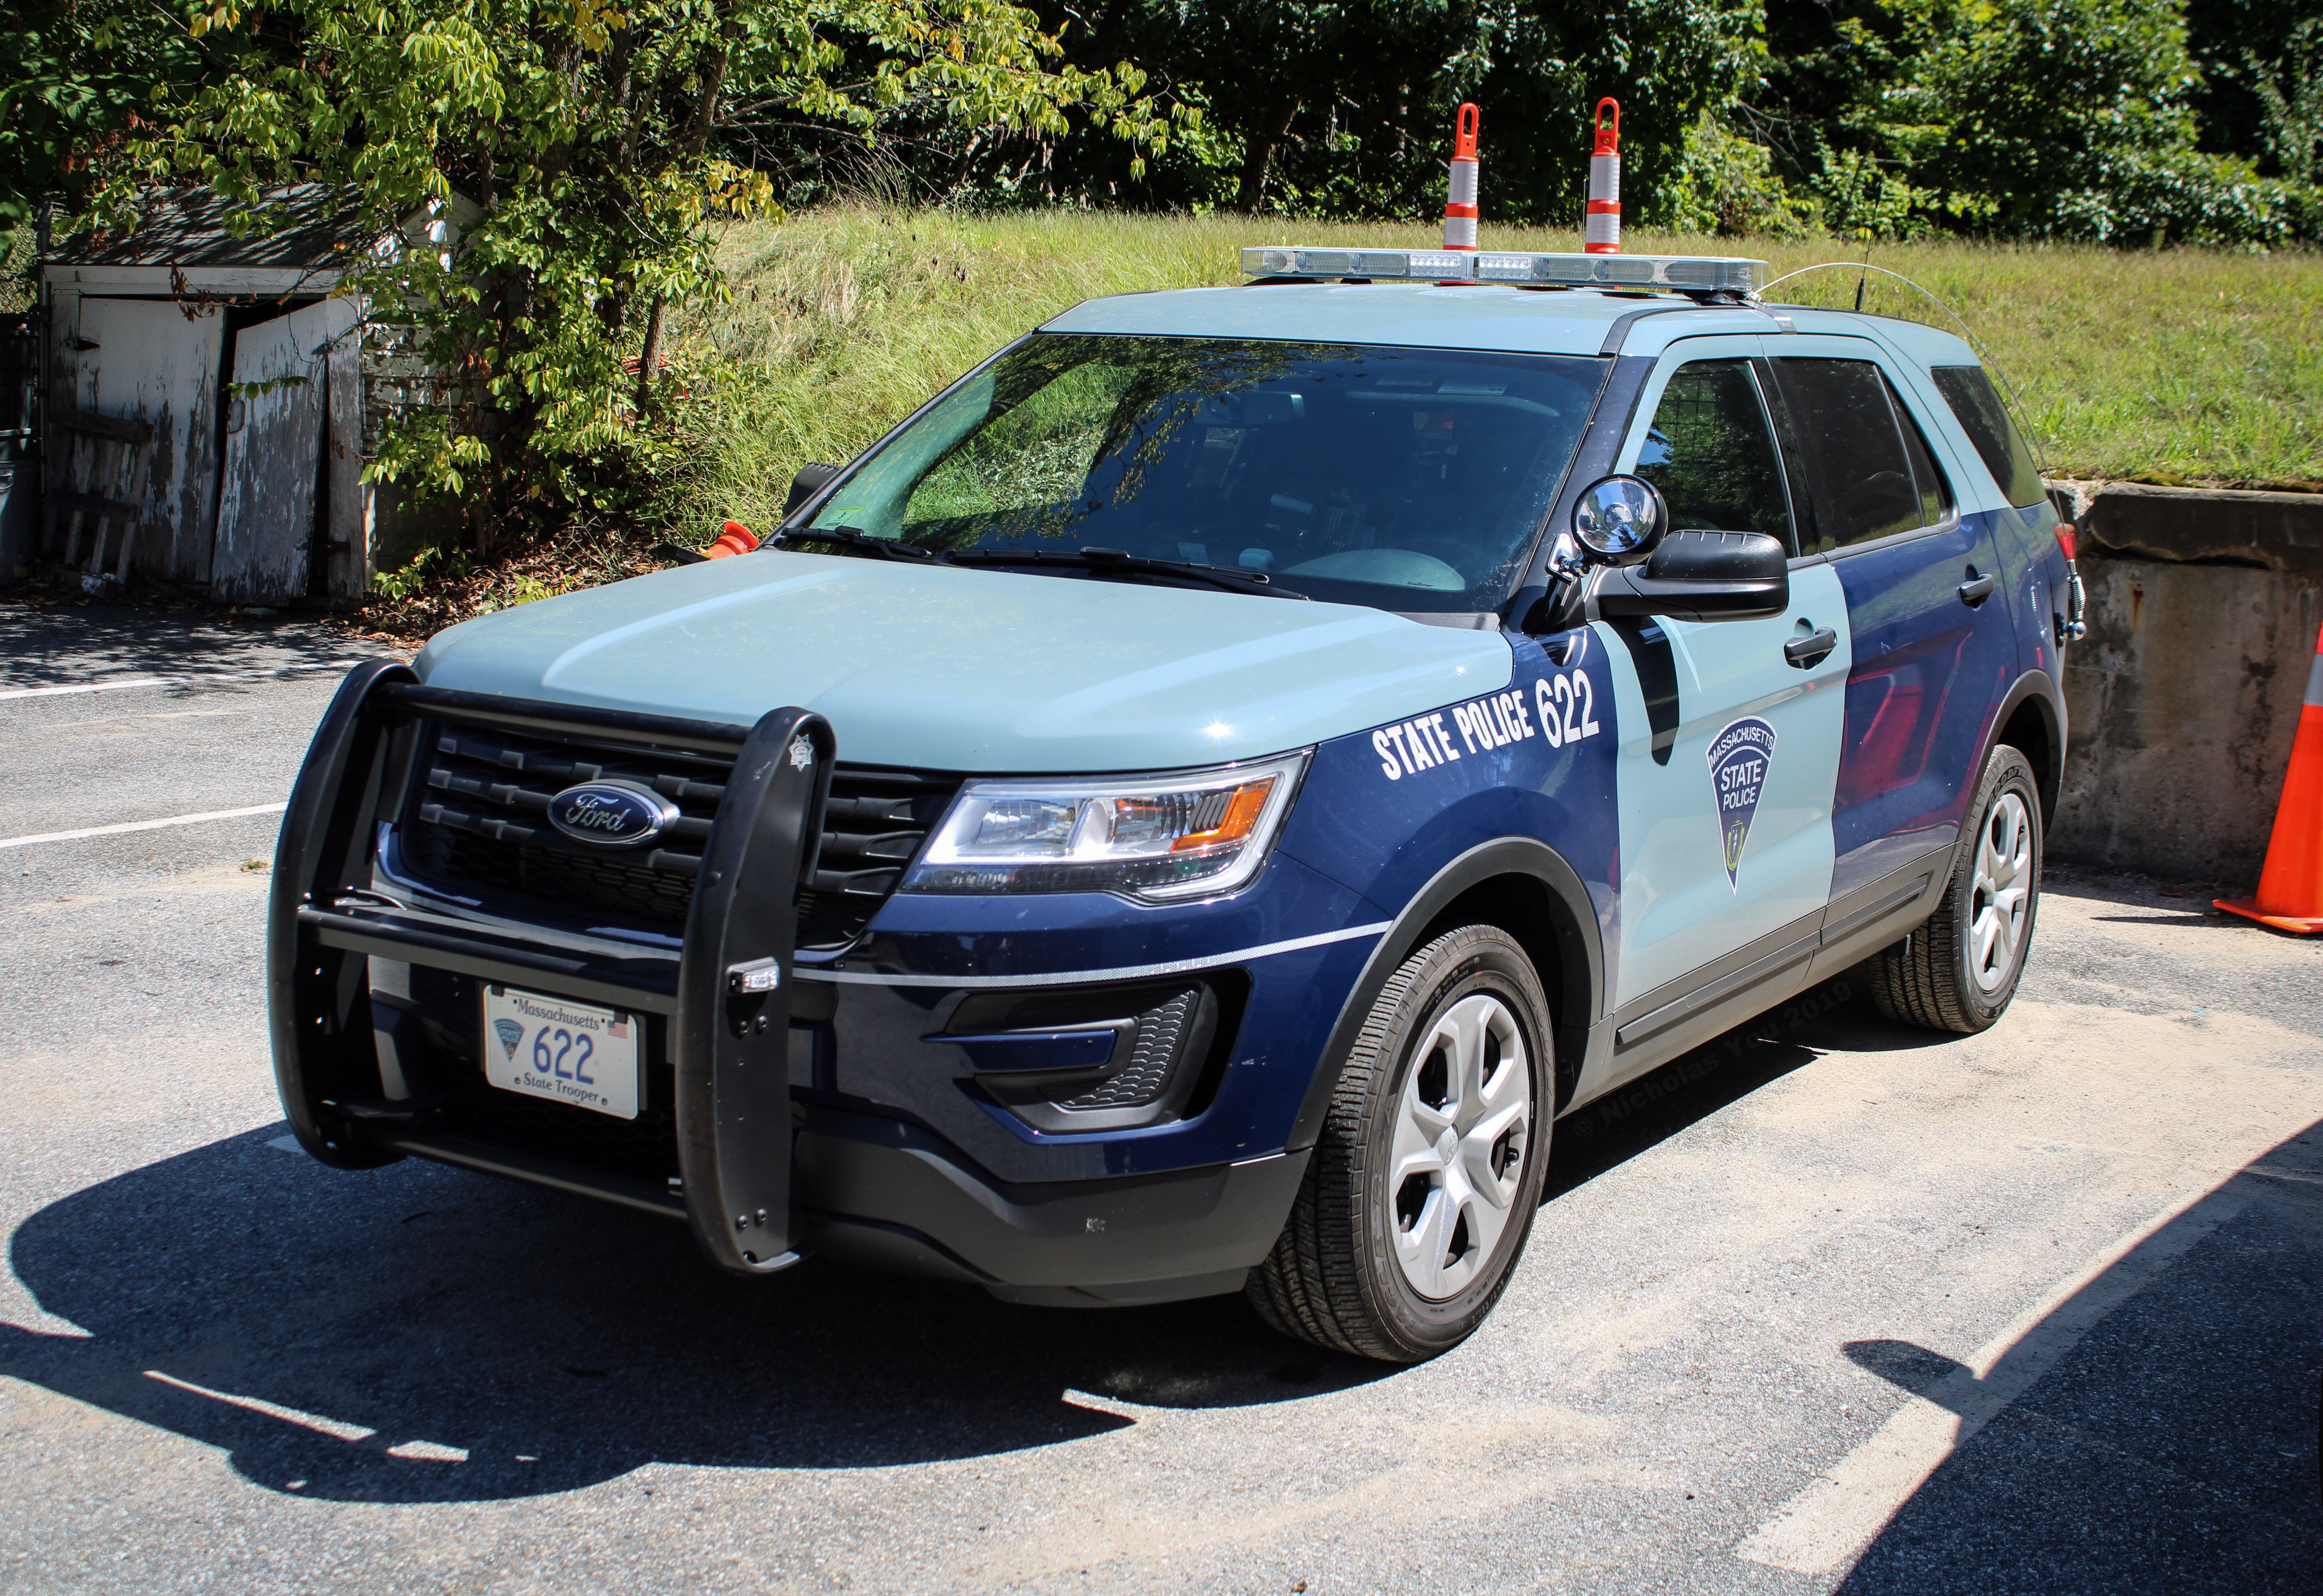 A photo  of Massachusetts State Police
            Cruiser 622, a 2019 Ford Police Interceptor Utility             taken by Nicholas You